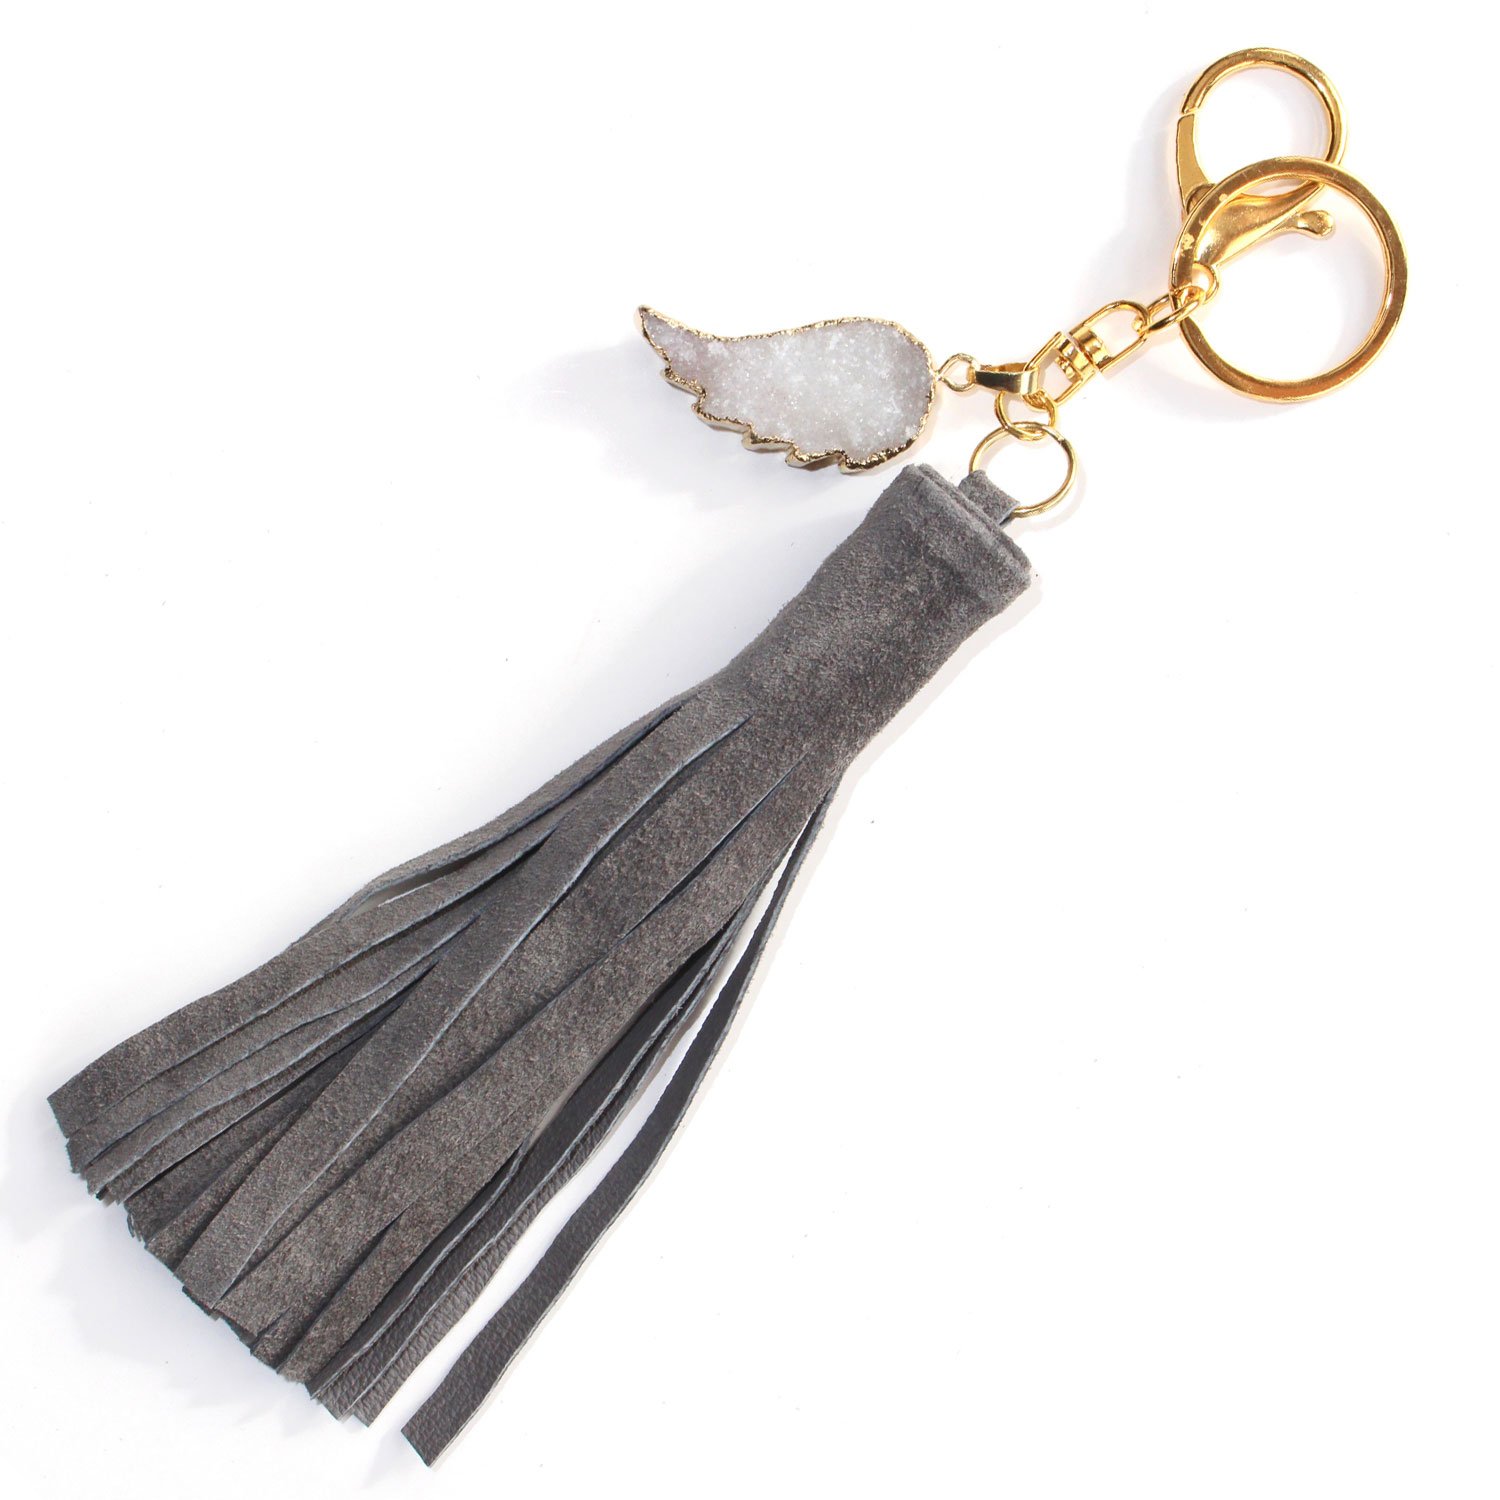 10 Pieces Artificial Leather Tassel with Swivel Clasp 5.9inch Fringe  Keychain Bag Charm for Women Bag Accessories Purse Making (Pale Pink) :  Amazon.sg: Office Products